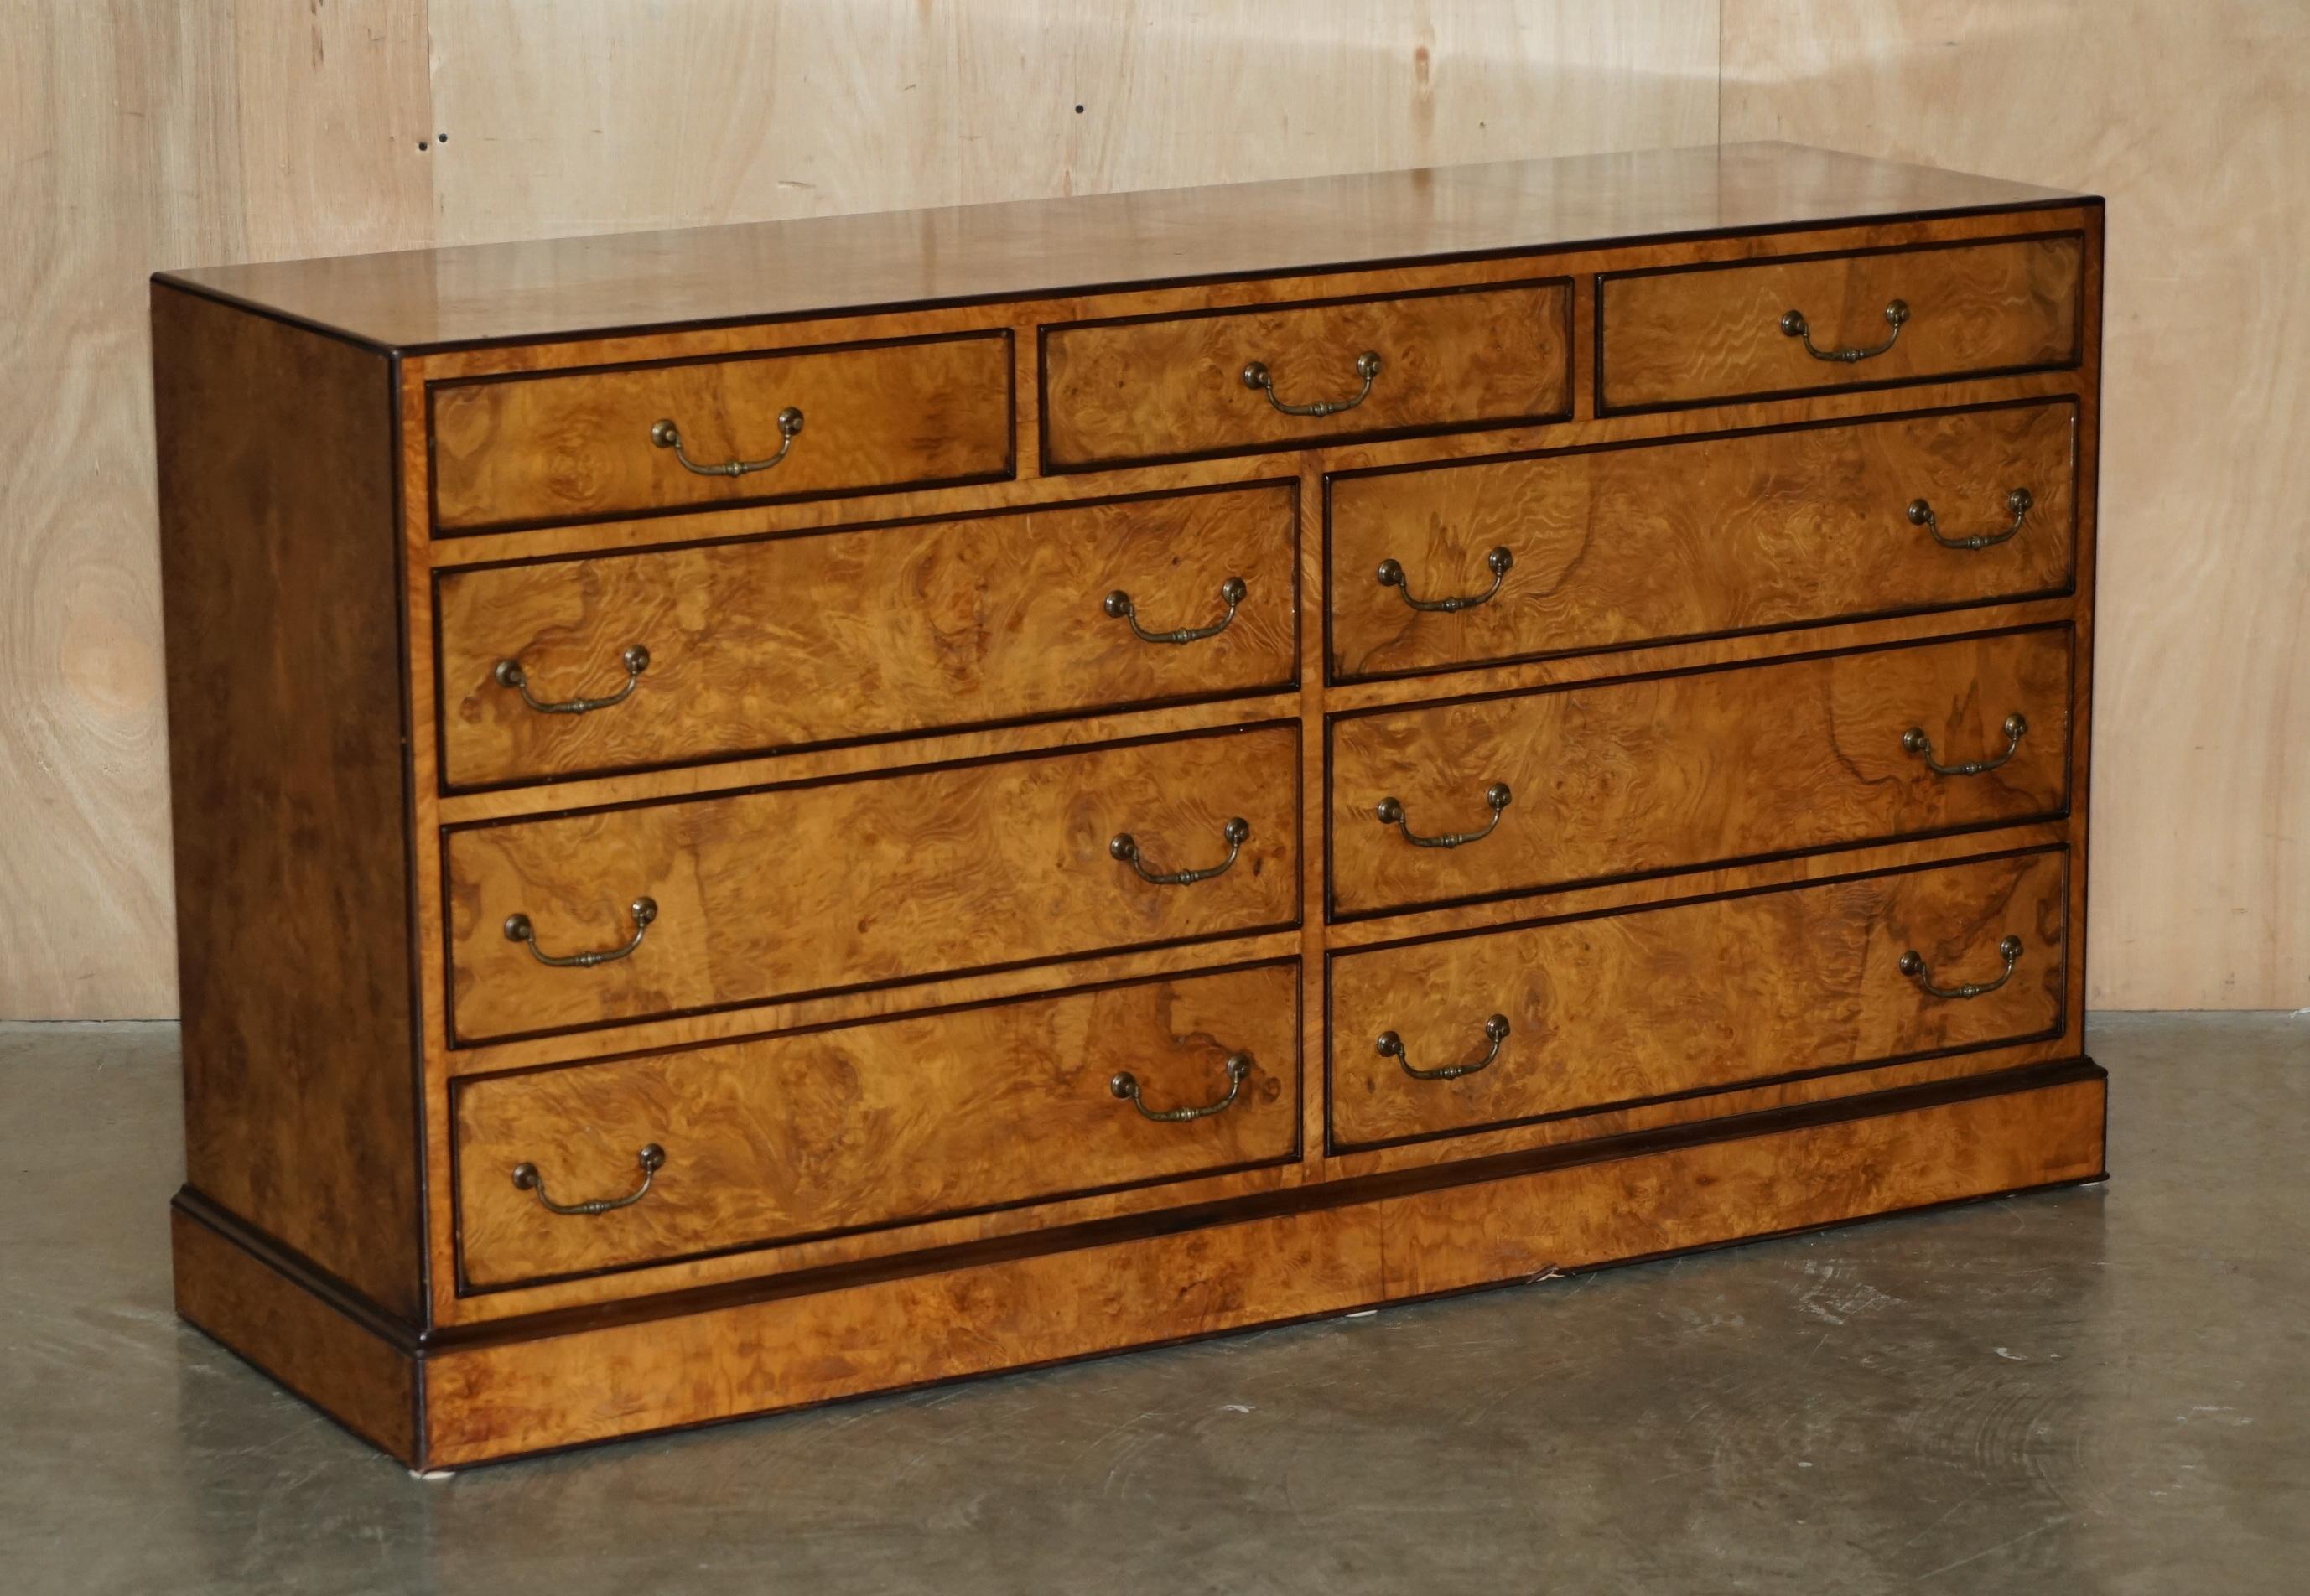 Royal House Antiques

Royal House Antiques is delighted to offer for sale this stunning pair of vintage, Burr Elm sideboard banks of drawers which sublime timber patina 

Please note the delivery fee listed is just a guide, it covers within the M25